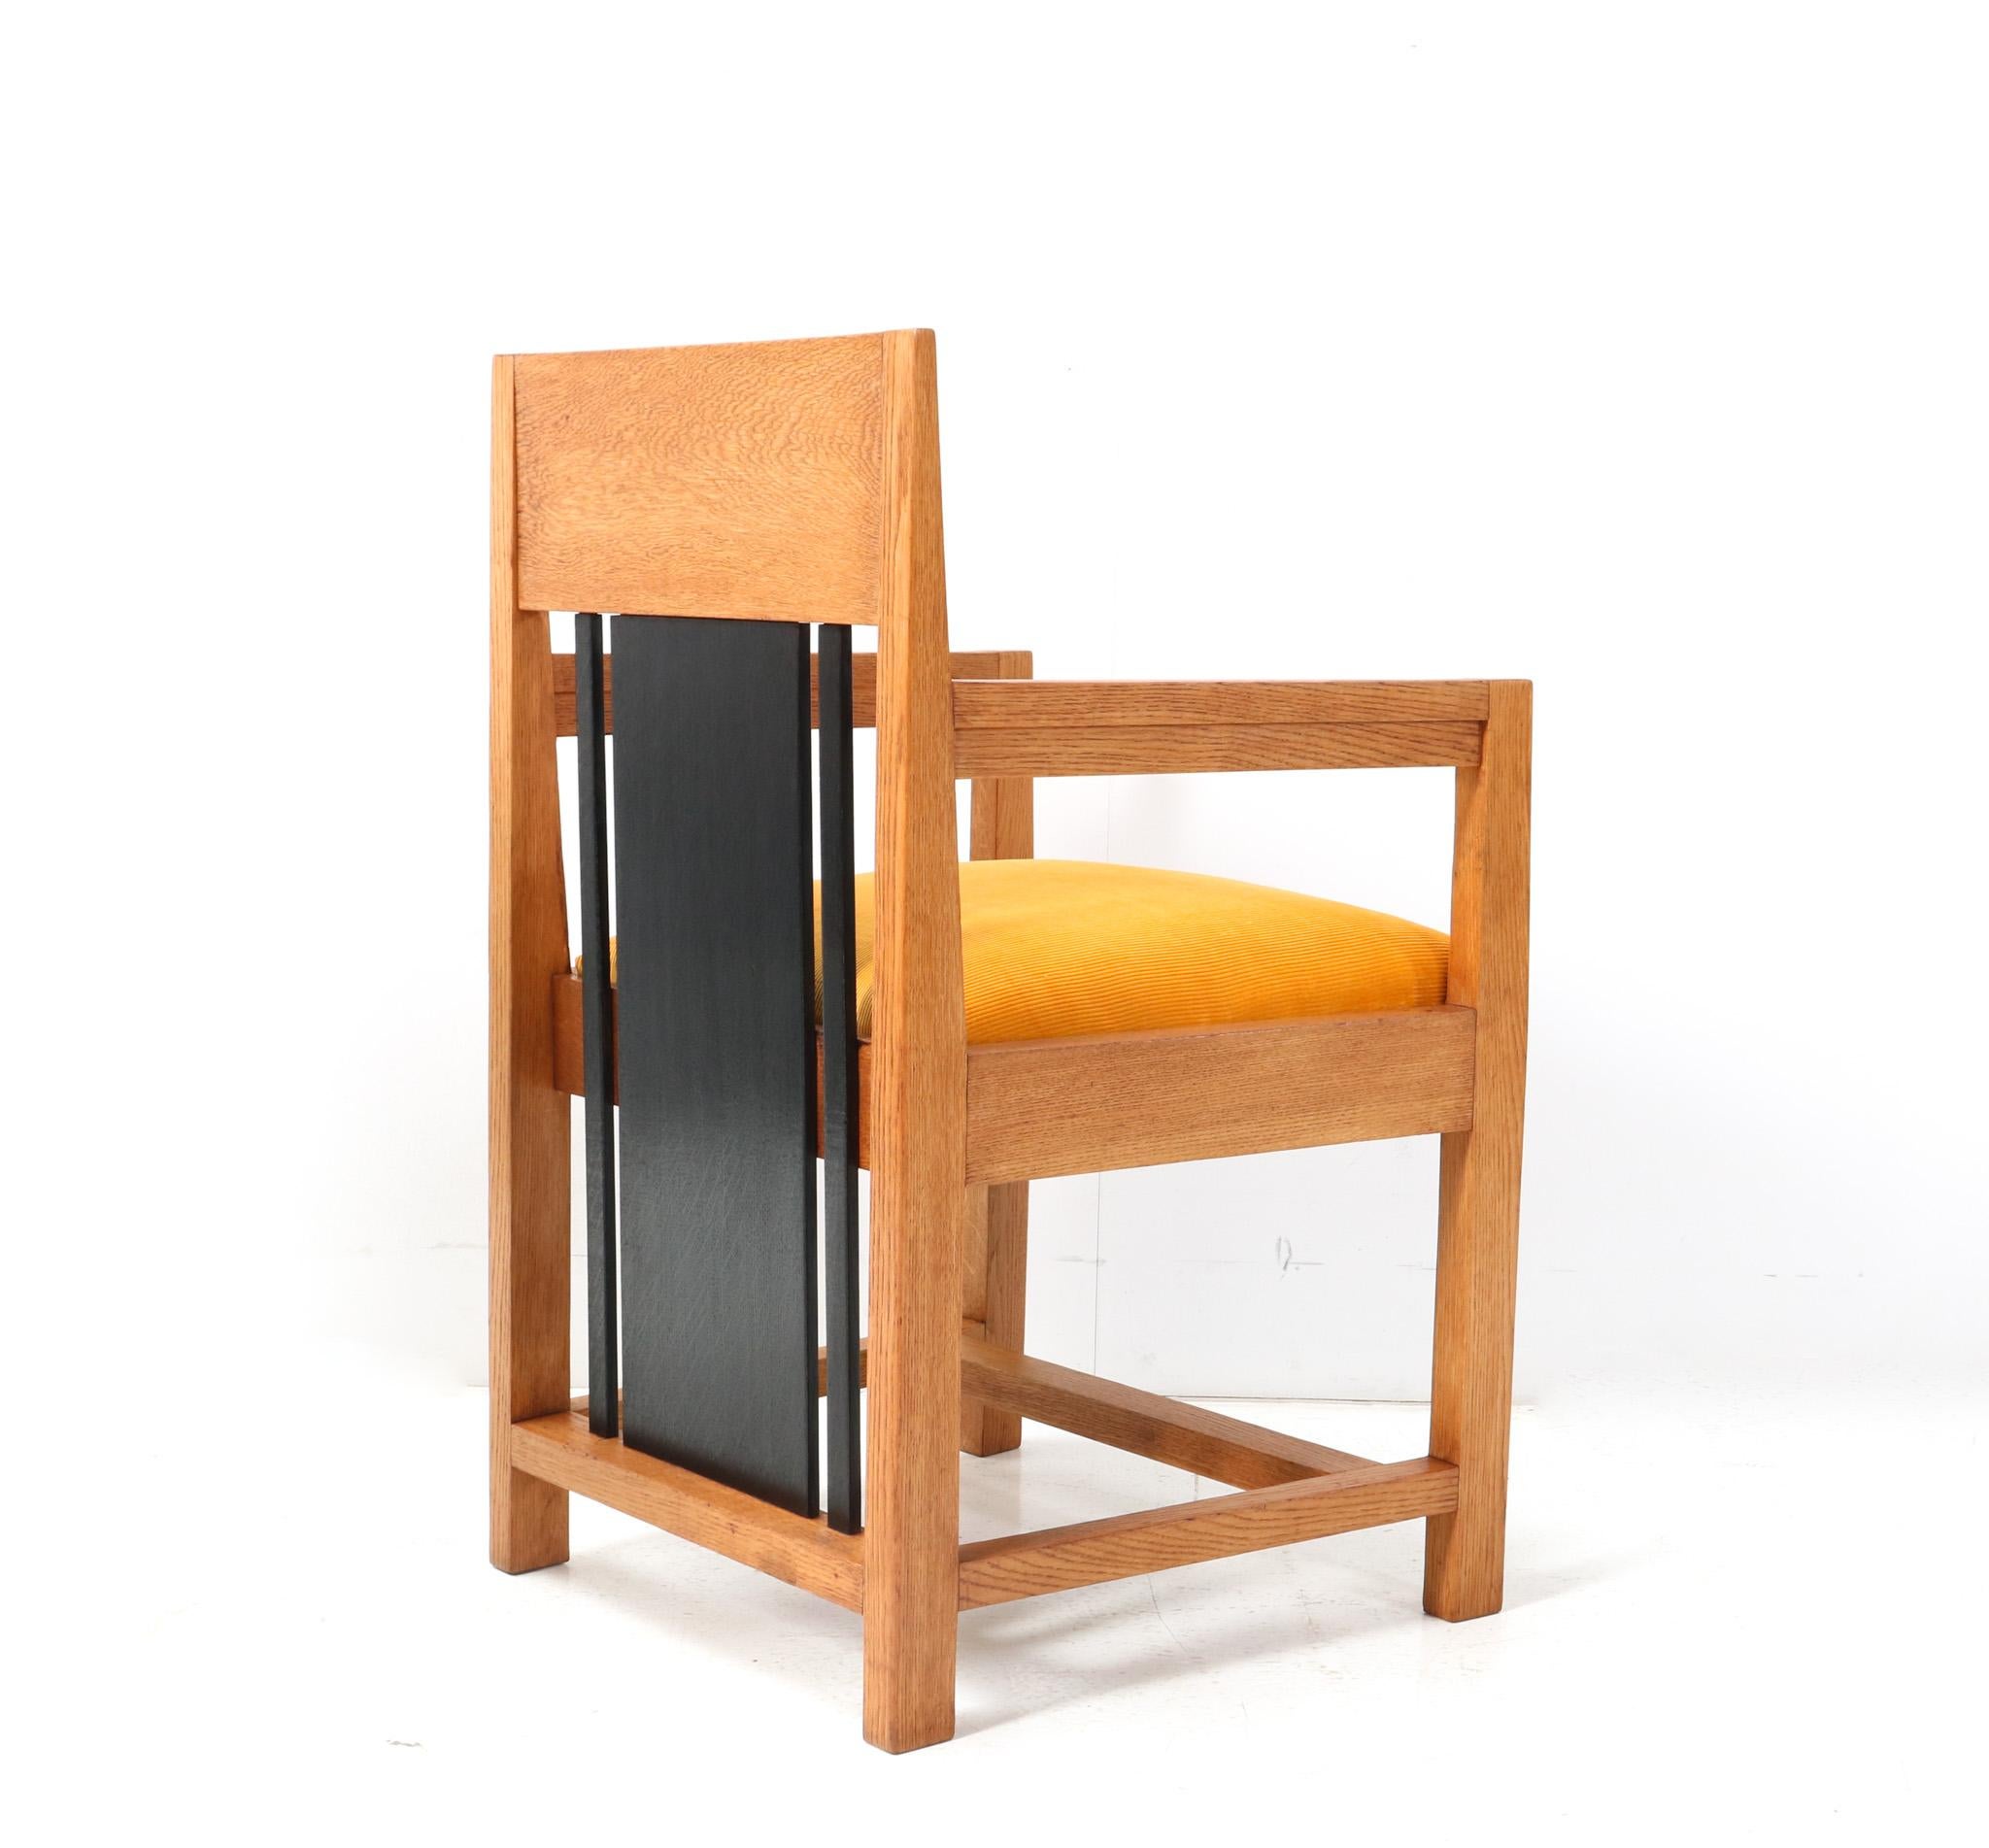 Two Oak Art Deco Modernist High Back  Armchairs by Cor Alons, 1927 For Sale 2